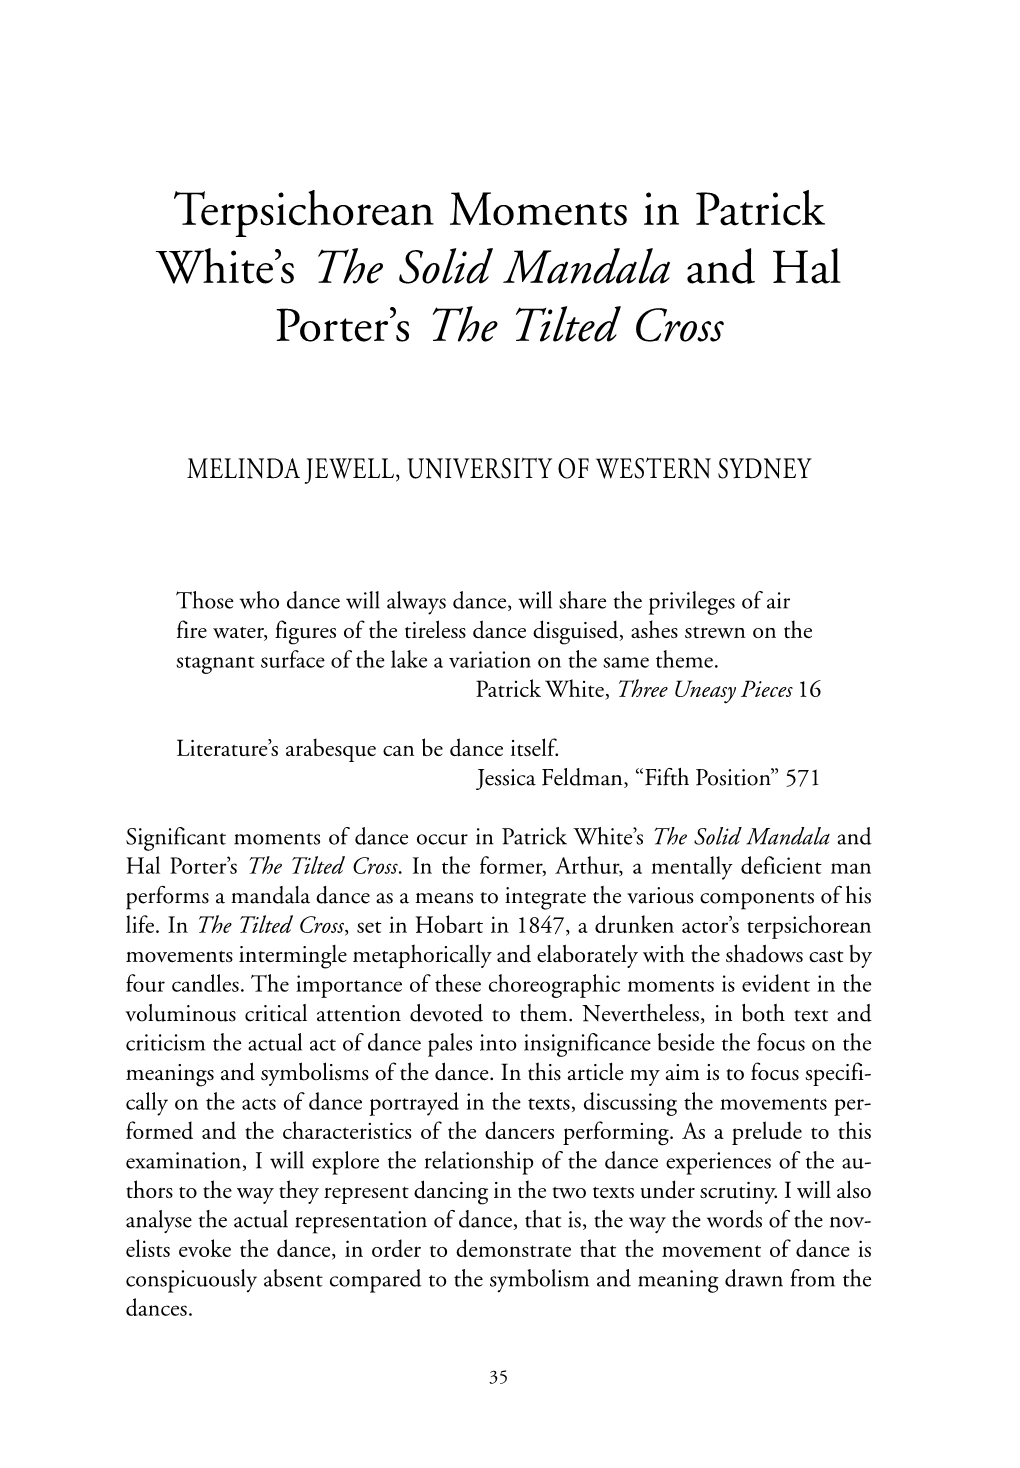 Terpsichorean Moments in Patrick White's the Solid Mandala and Hal Porter's the Tilted Cross